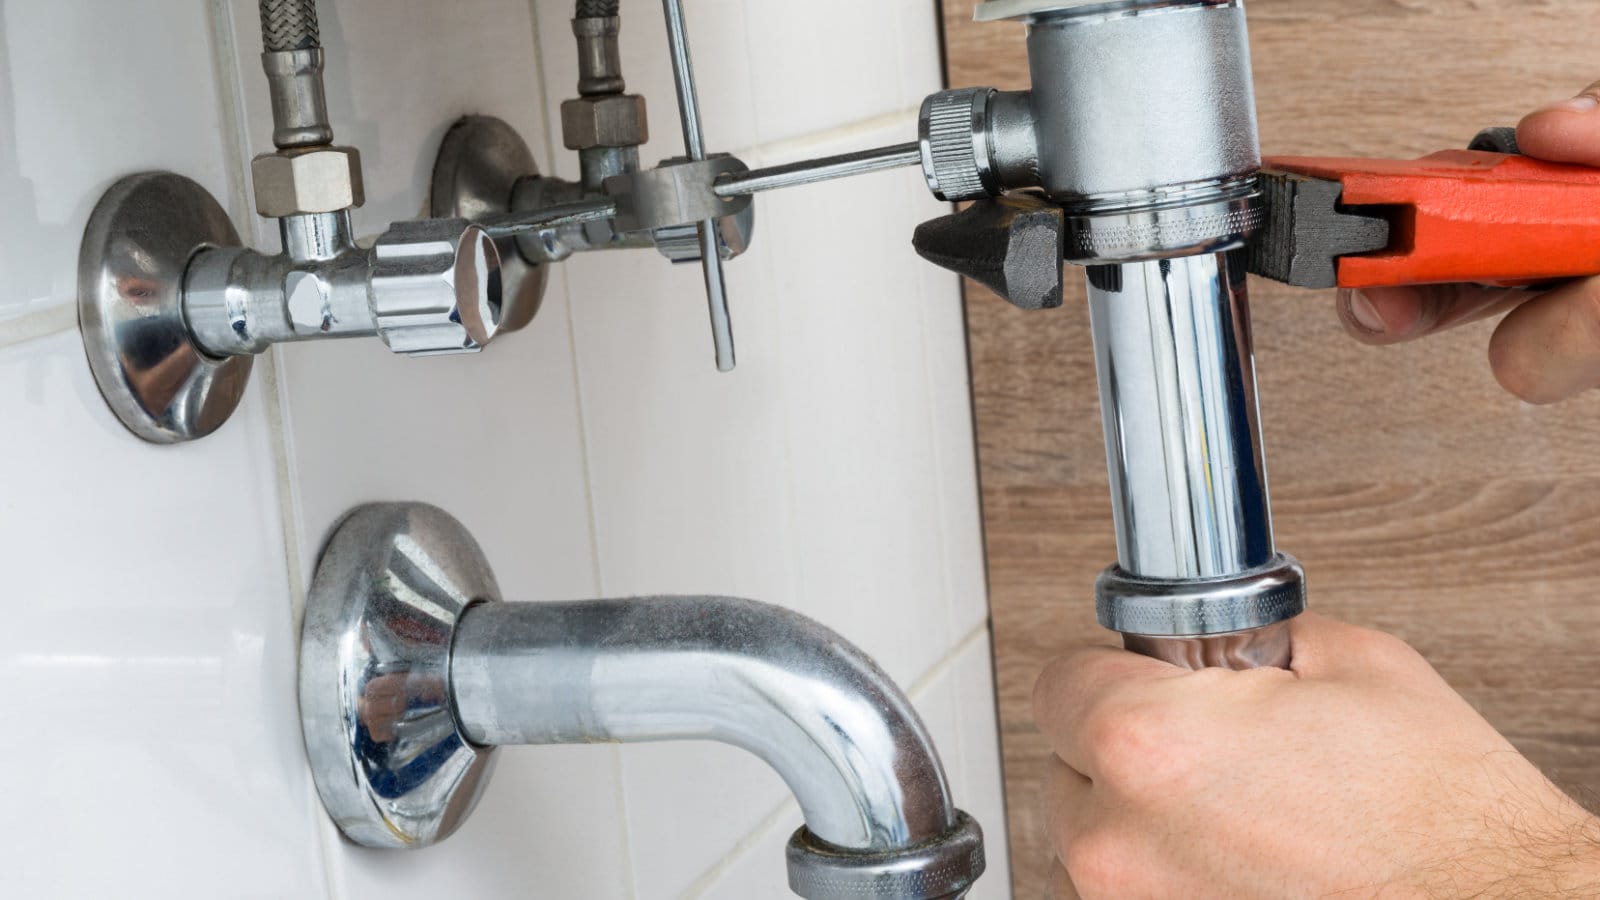 How to Avoid Costly Plumbing Repairs With Preventive Measures